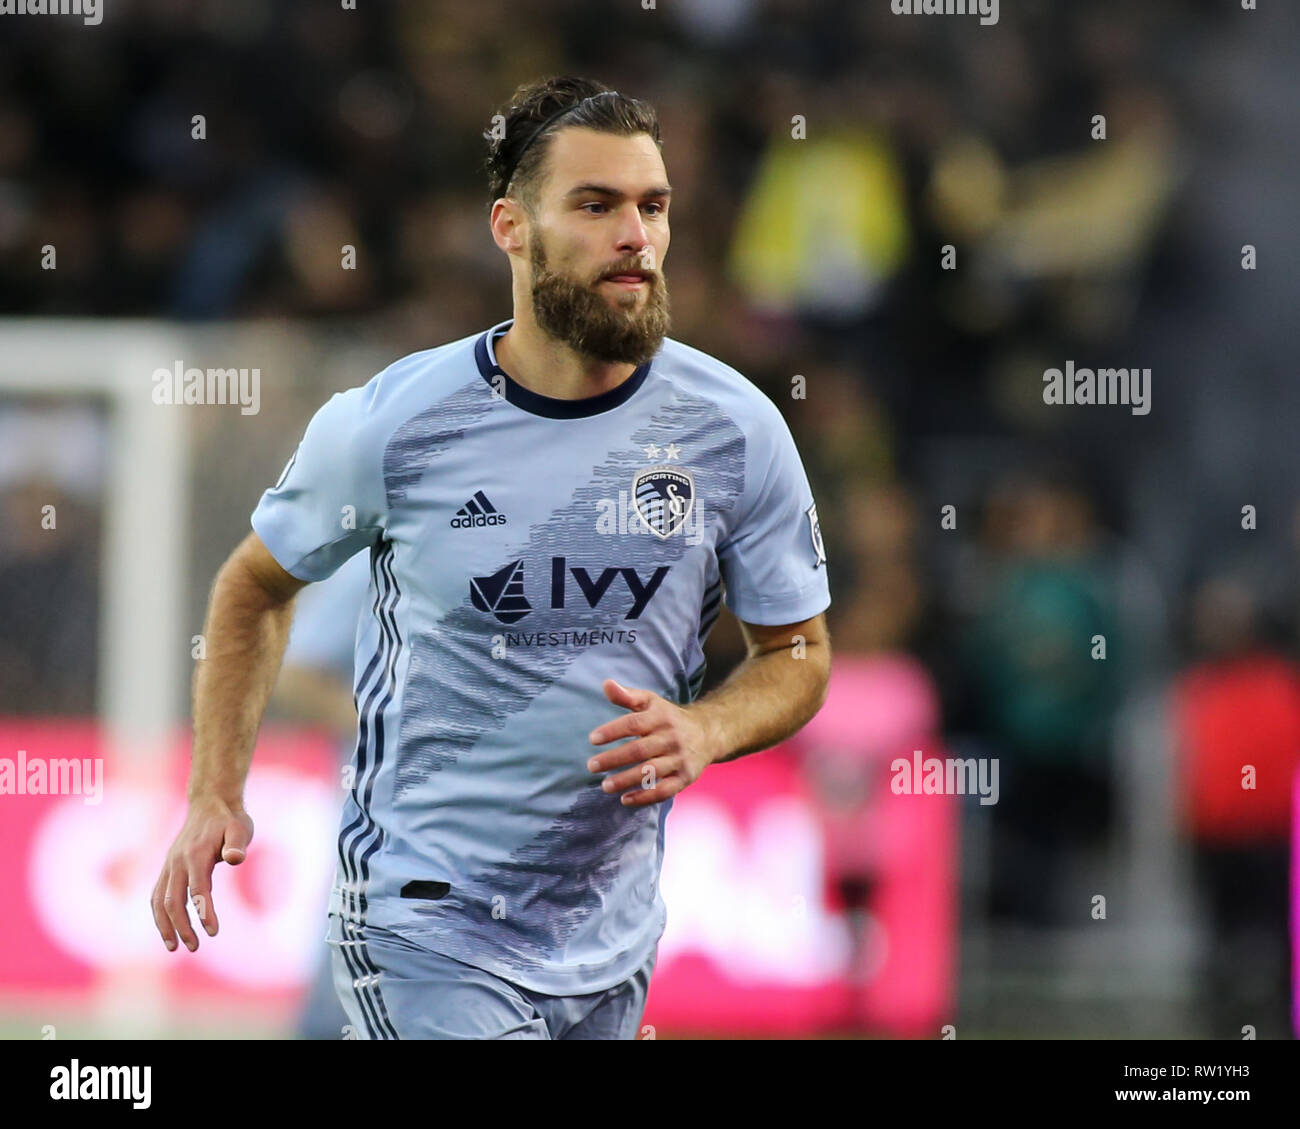 Los Angeles, CA, USA. 03rd Mar, 2019. MLS 2019: Sporting Kansas City midfielder Graham Zusi #8 during the Los Angeles Football Club vs Sporting KC at BANC OF CALIFORNIA Stadium in Los Angeles, Ca on March 03, 2019. Photo by Jevone Moore Credit: csm/Alamy Live News Stock Photo